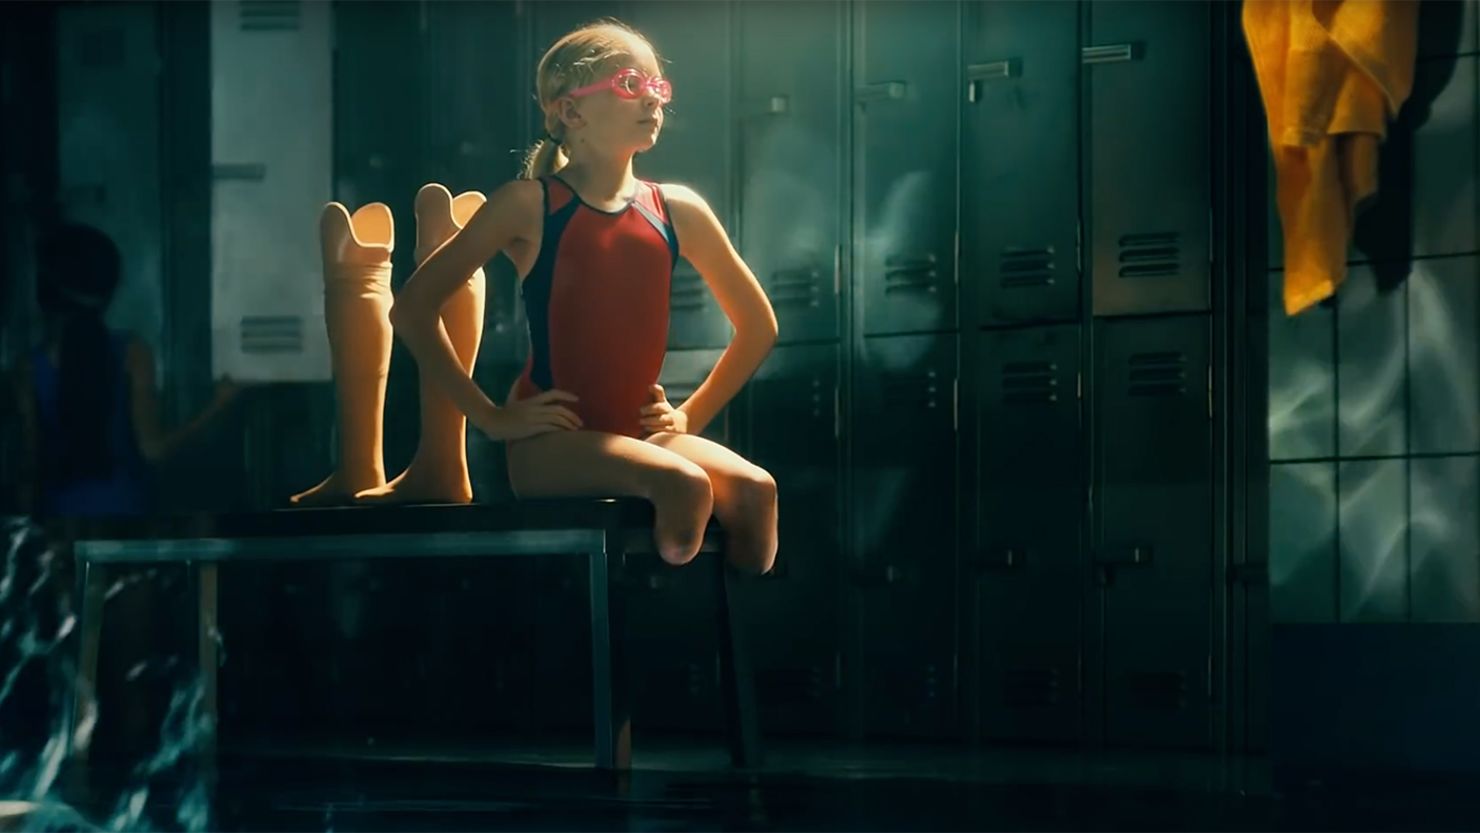 Toyota shows the story of Jessica Long, Paralympic swimmer, in its Super Bowl commercial.​